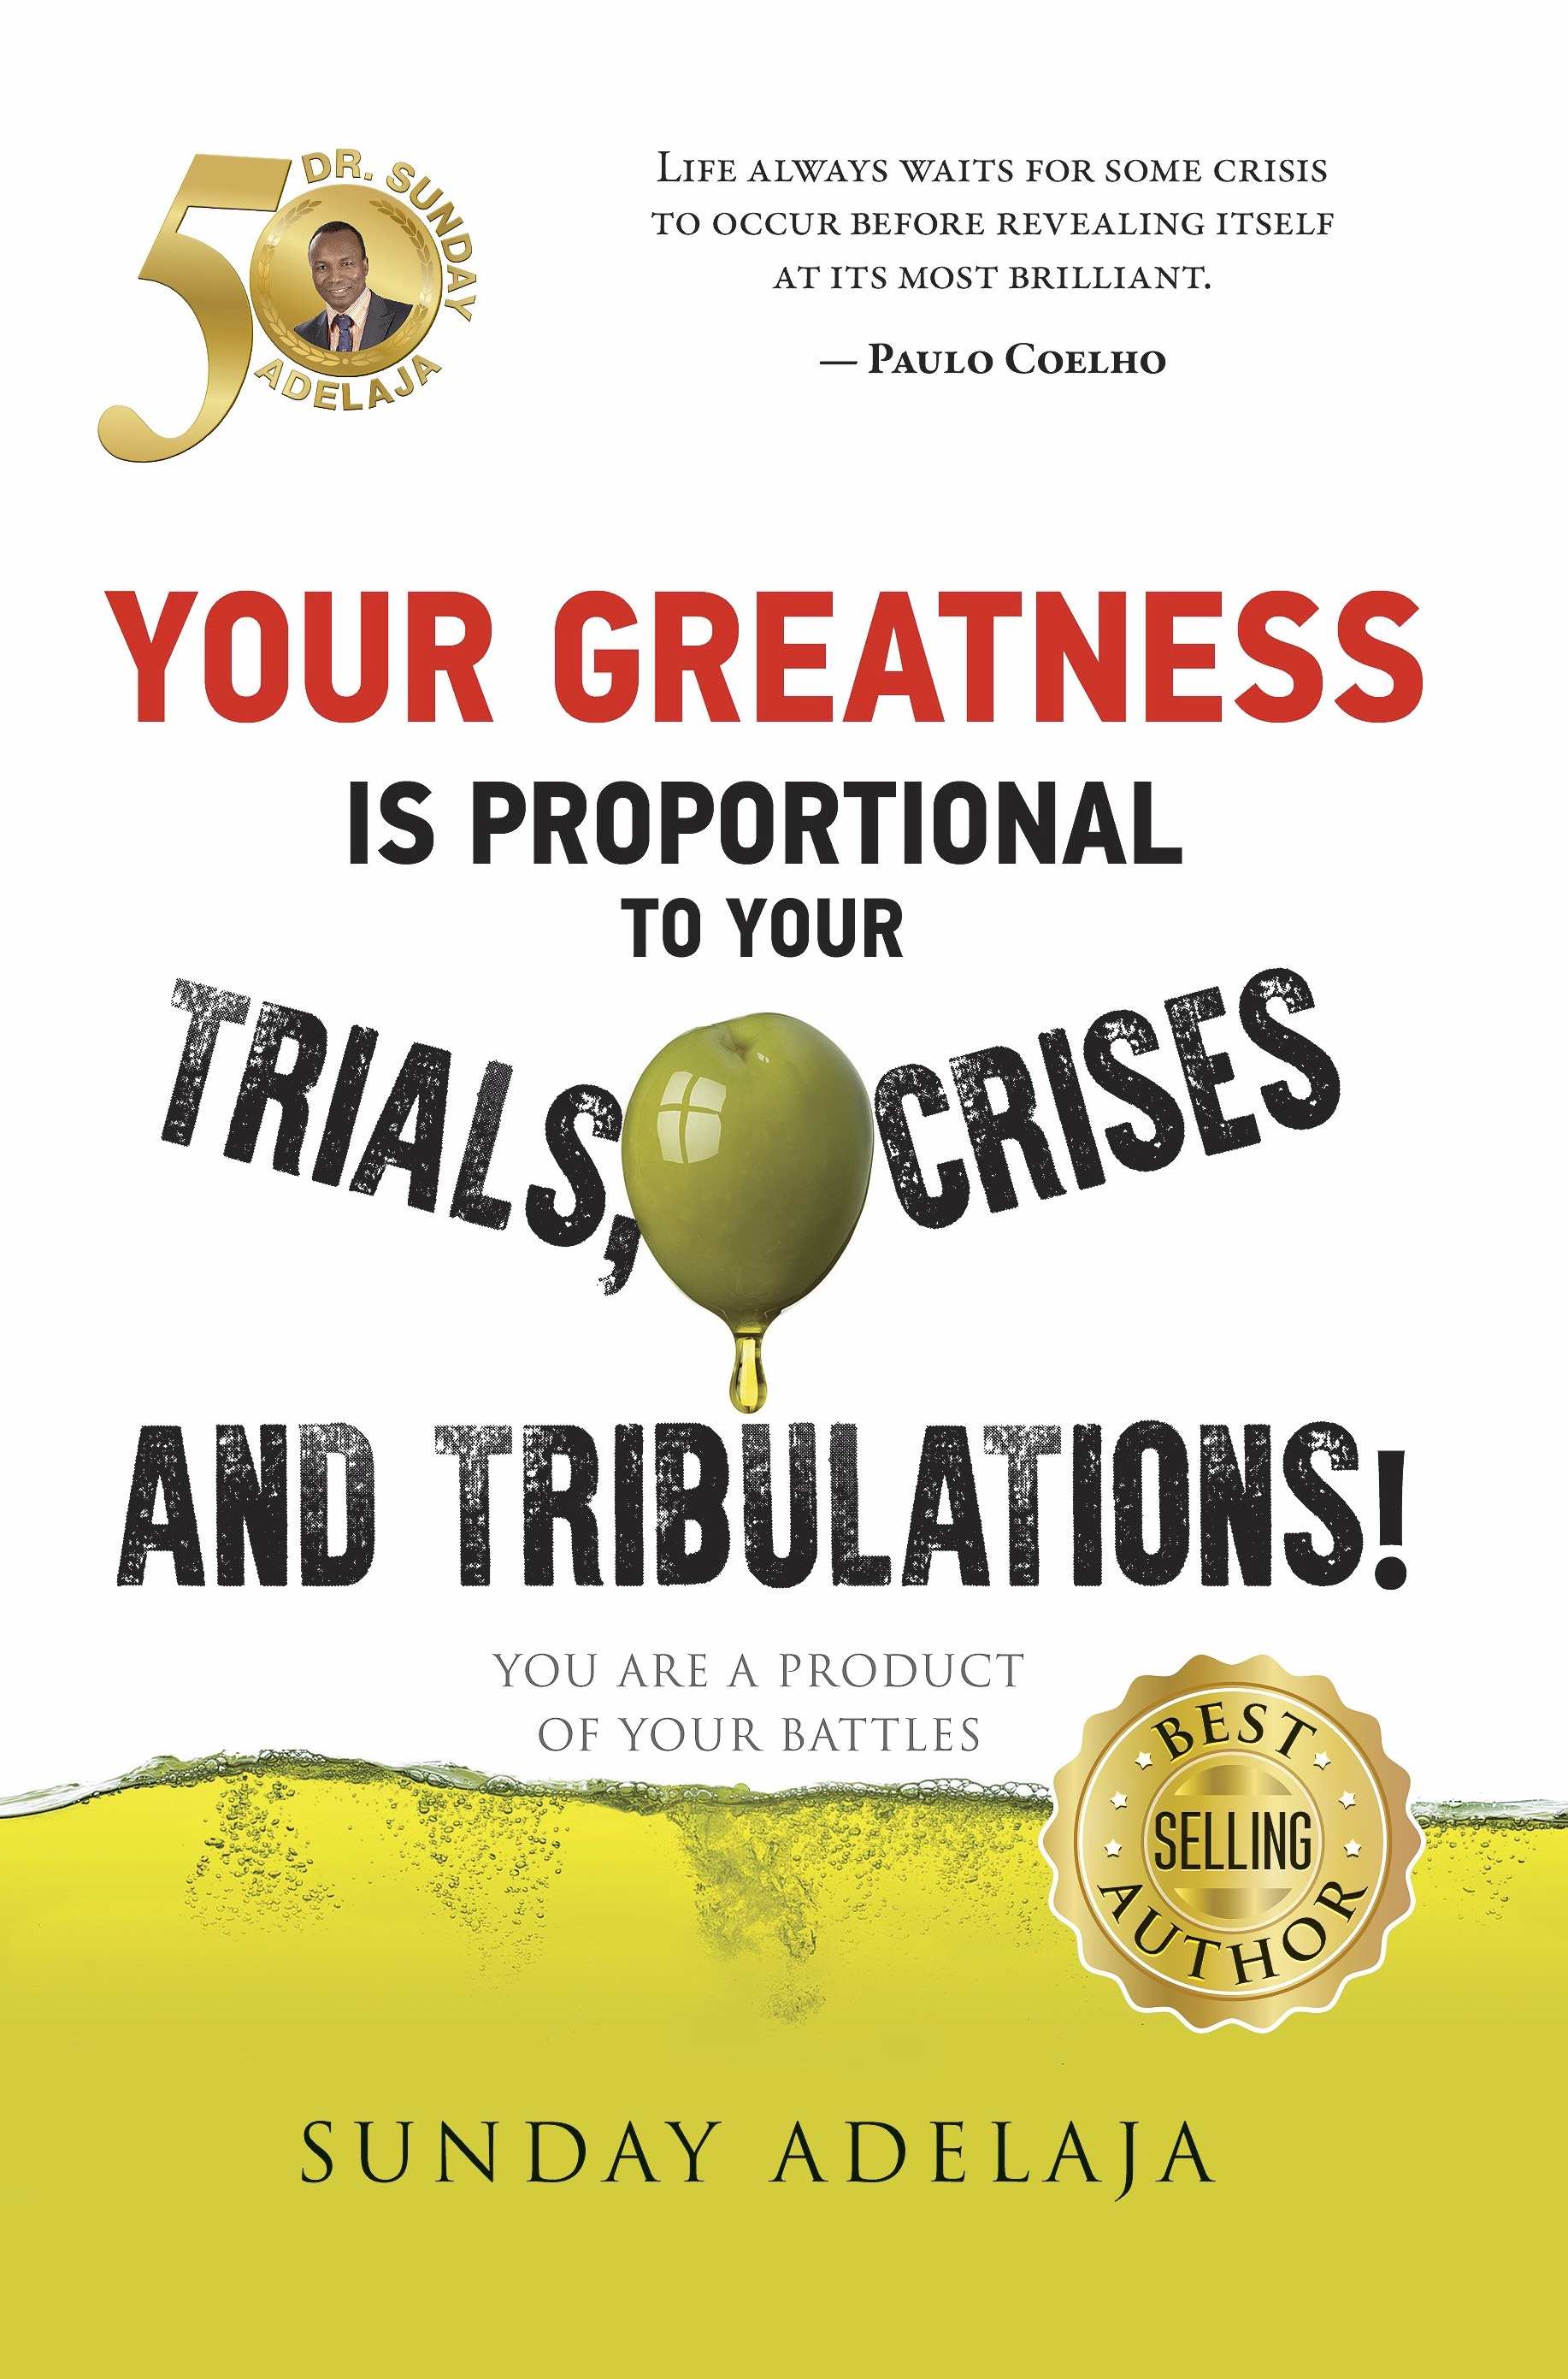 Your-Greatness-is-Proportional-to-Your-Trials--Crises-and-Tribulations!